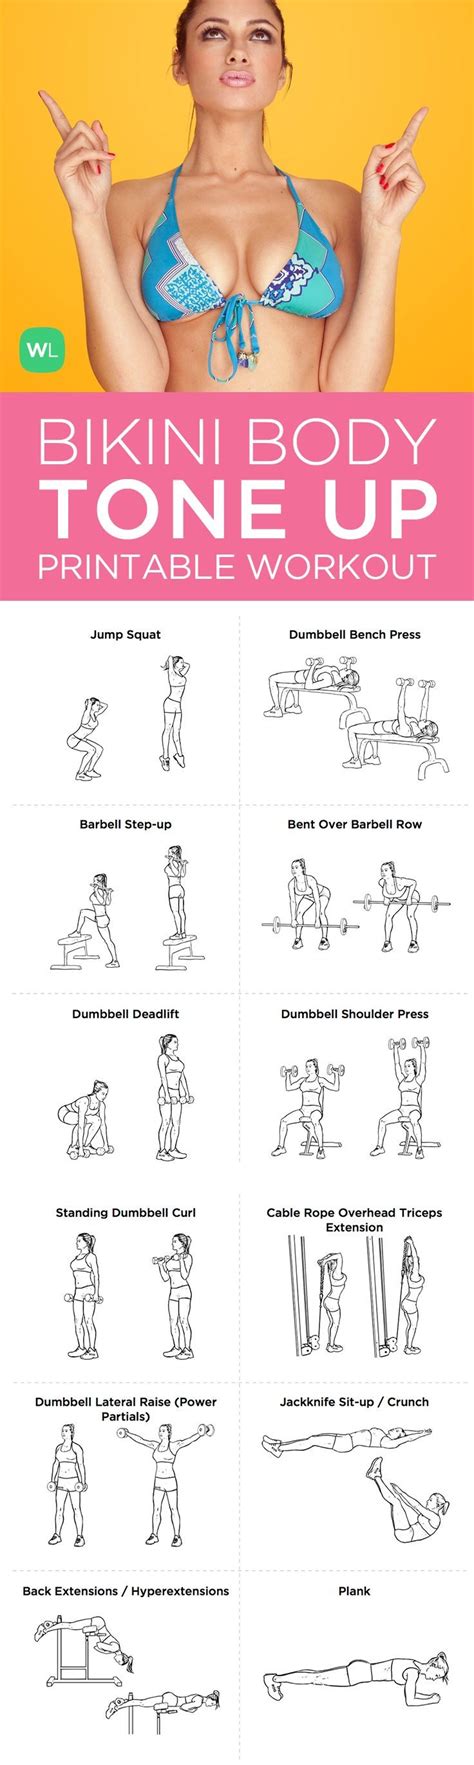 Bikini Body Tone Up Printable Workout Plan For Women Looking For A Workout Routine